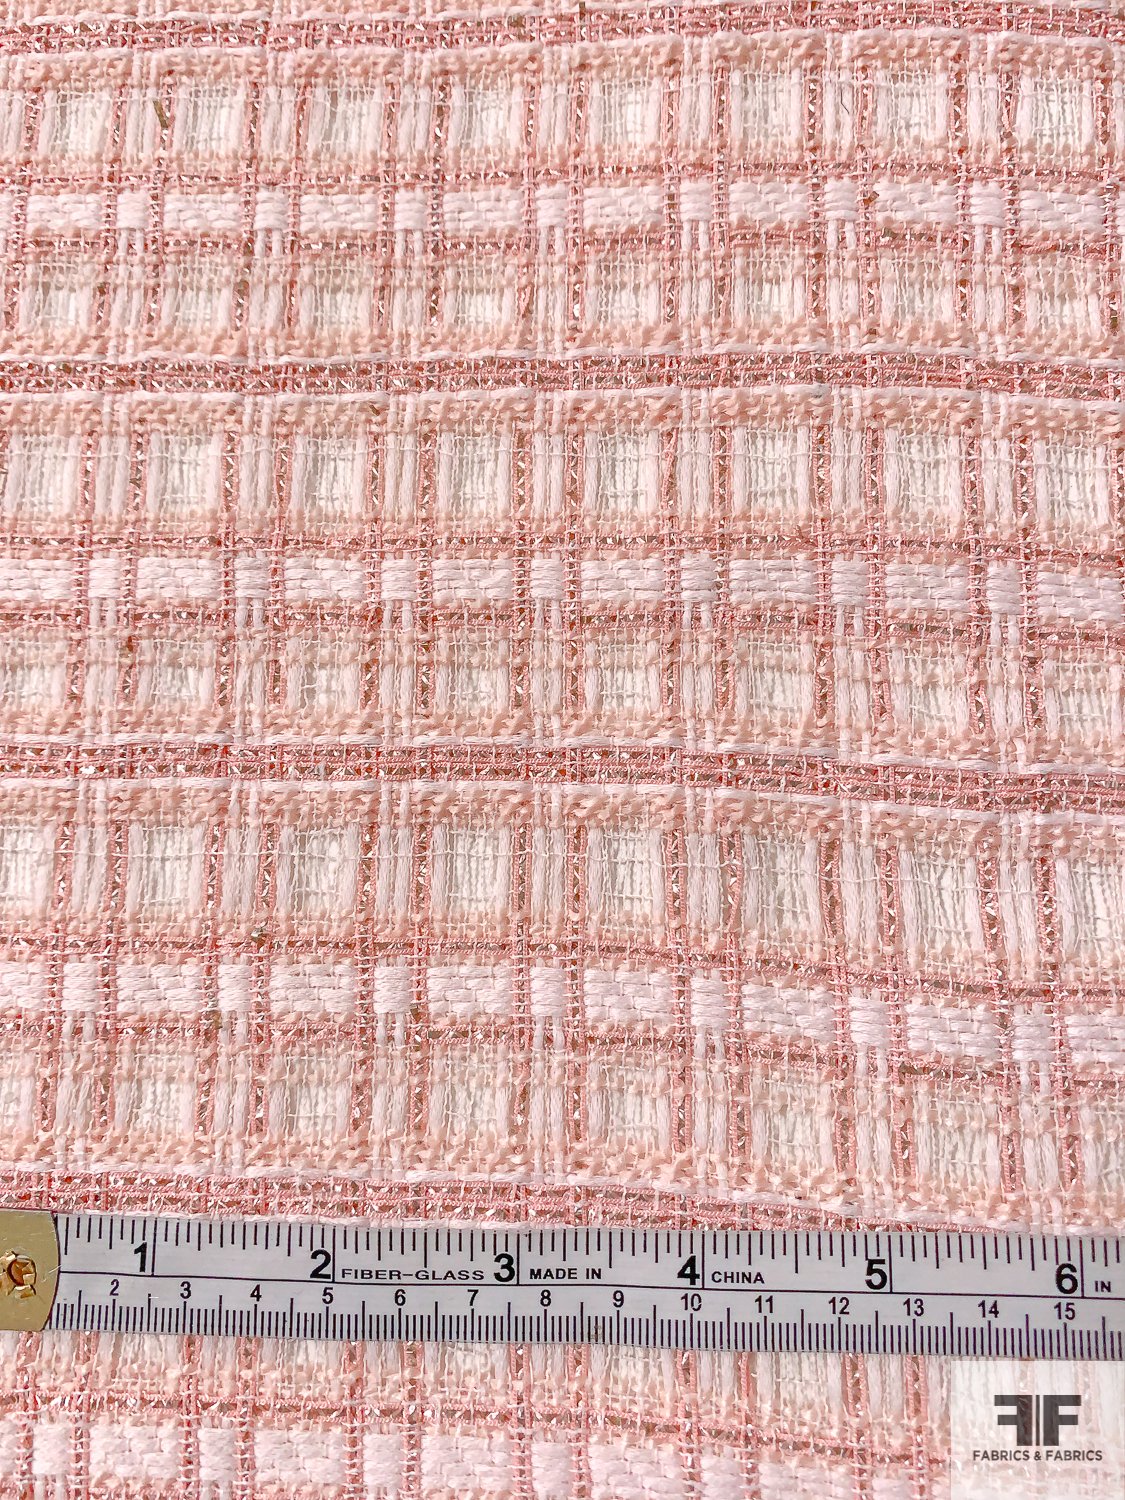 Loosely Woven Glam Tweed with Lurex Fibers - Blush Pink / Off-White / Metallic Taupe